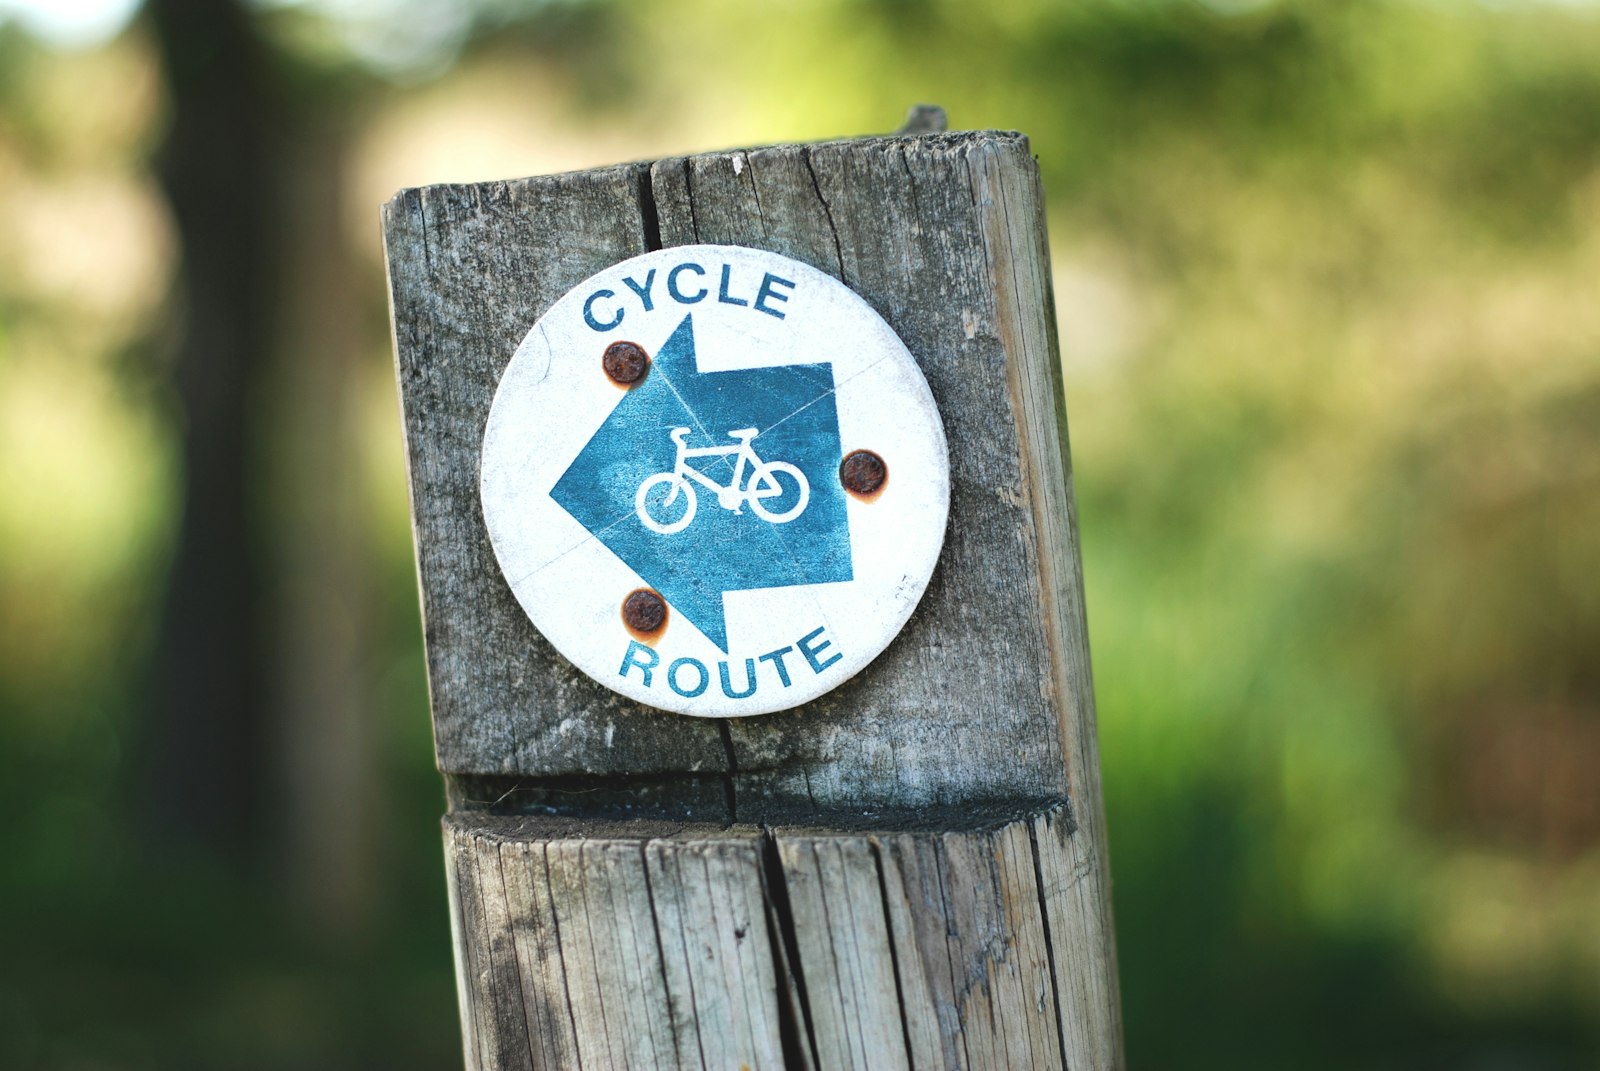 Nikon D80 + Nikon AF Nikkor 50mm F1.8D sample photo. Cycle route sign on photography